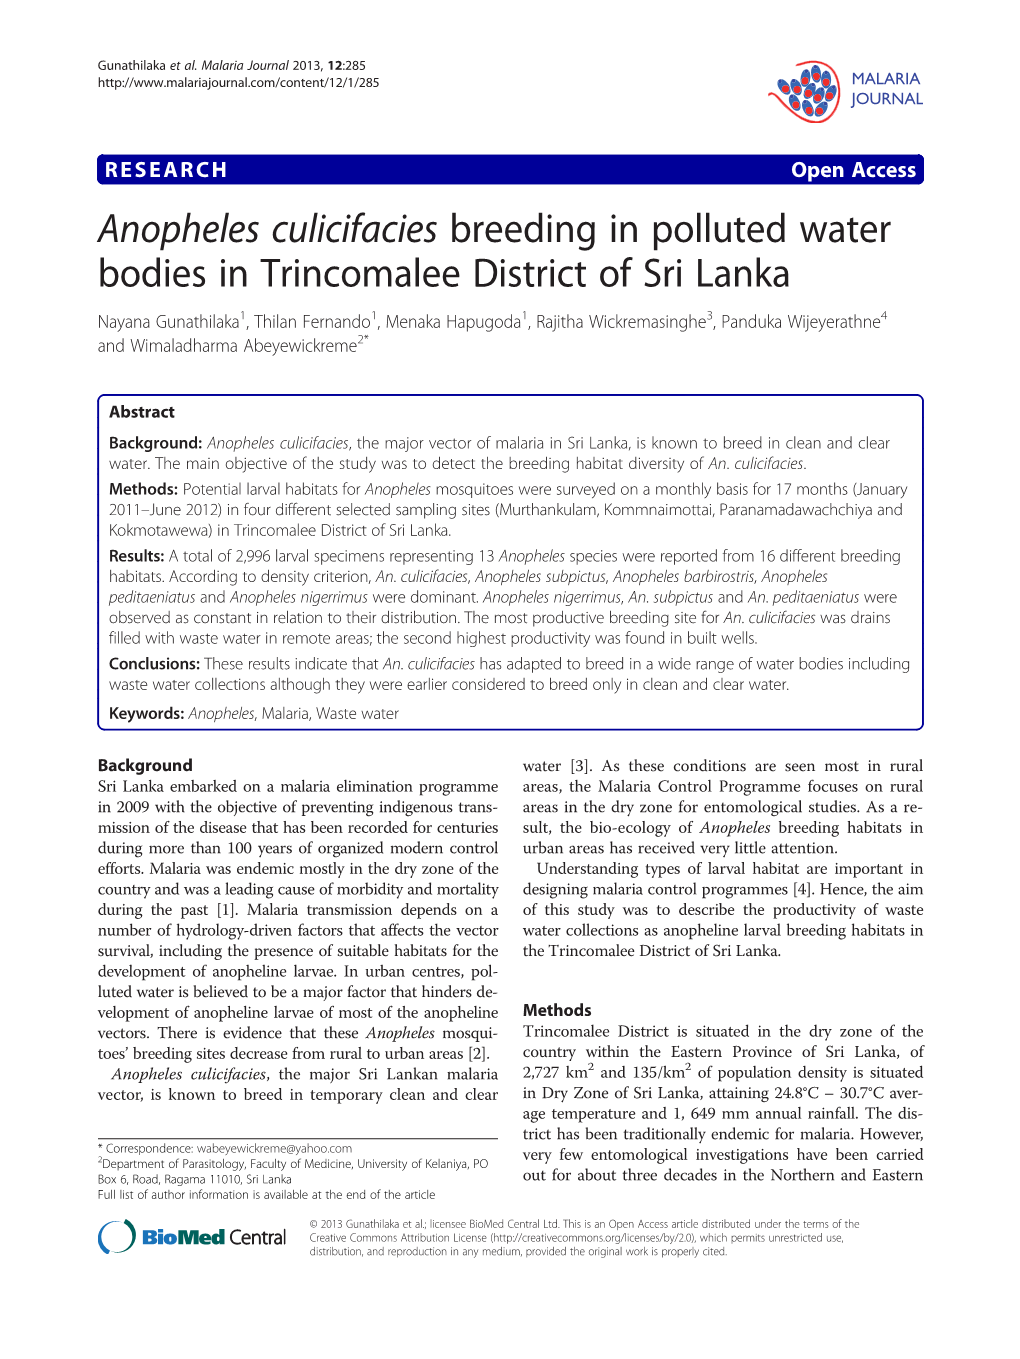 Anopheles Culicifacies Breeding in Polluted Water Bodies In